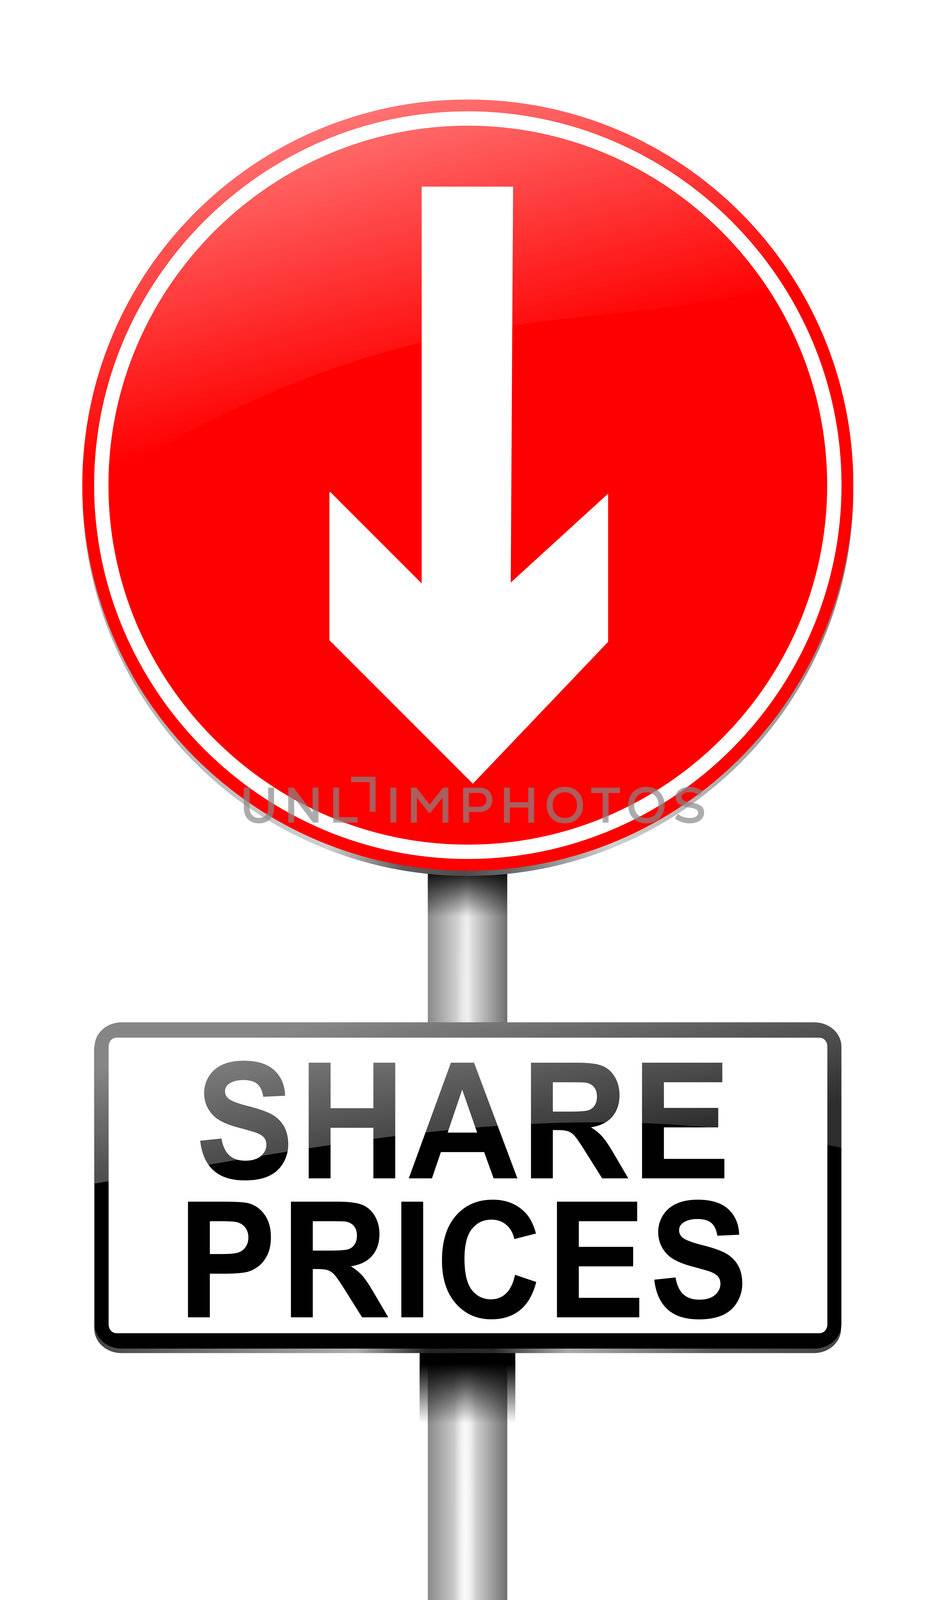 Illustration depicting a roadsign with a share price concept. White background.